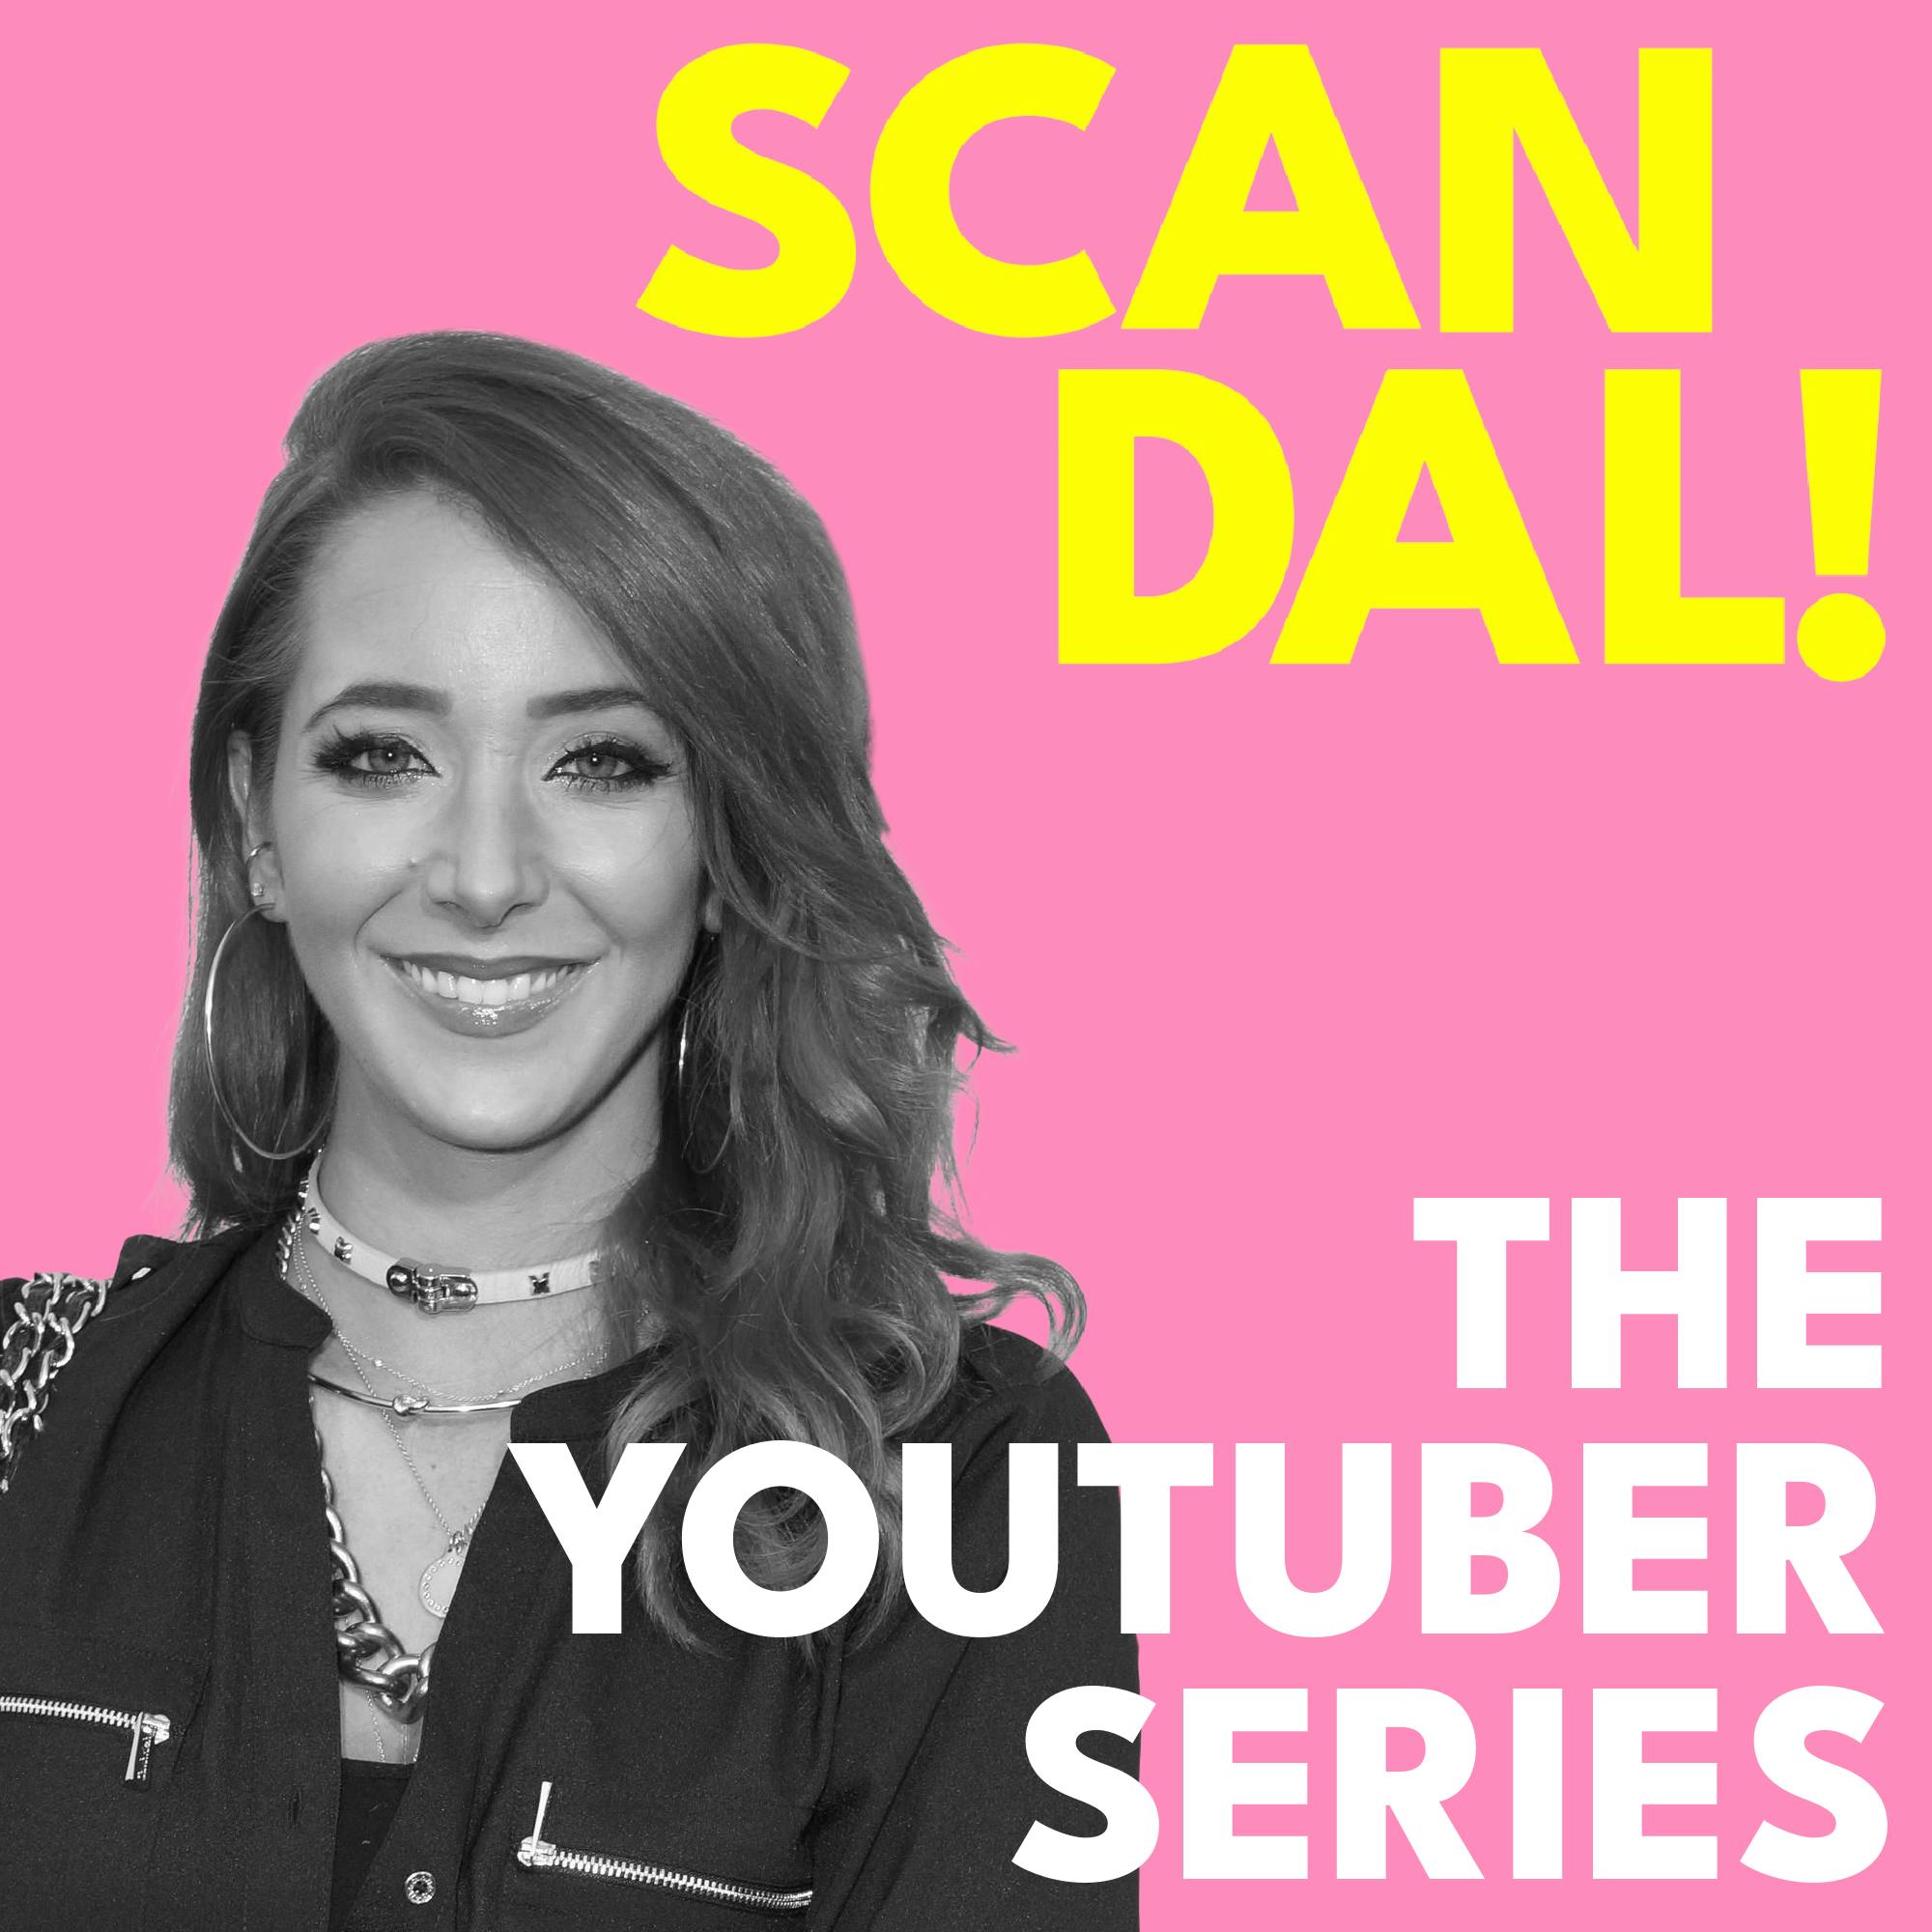 The YouTuber series: Jenna Marbles